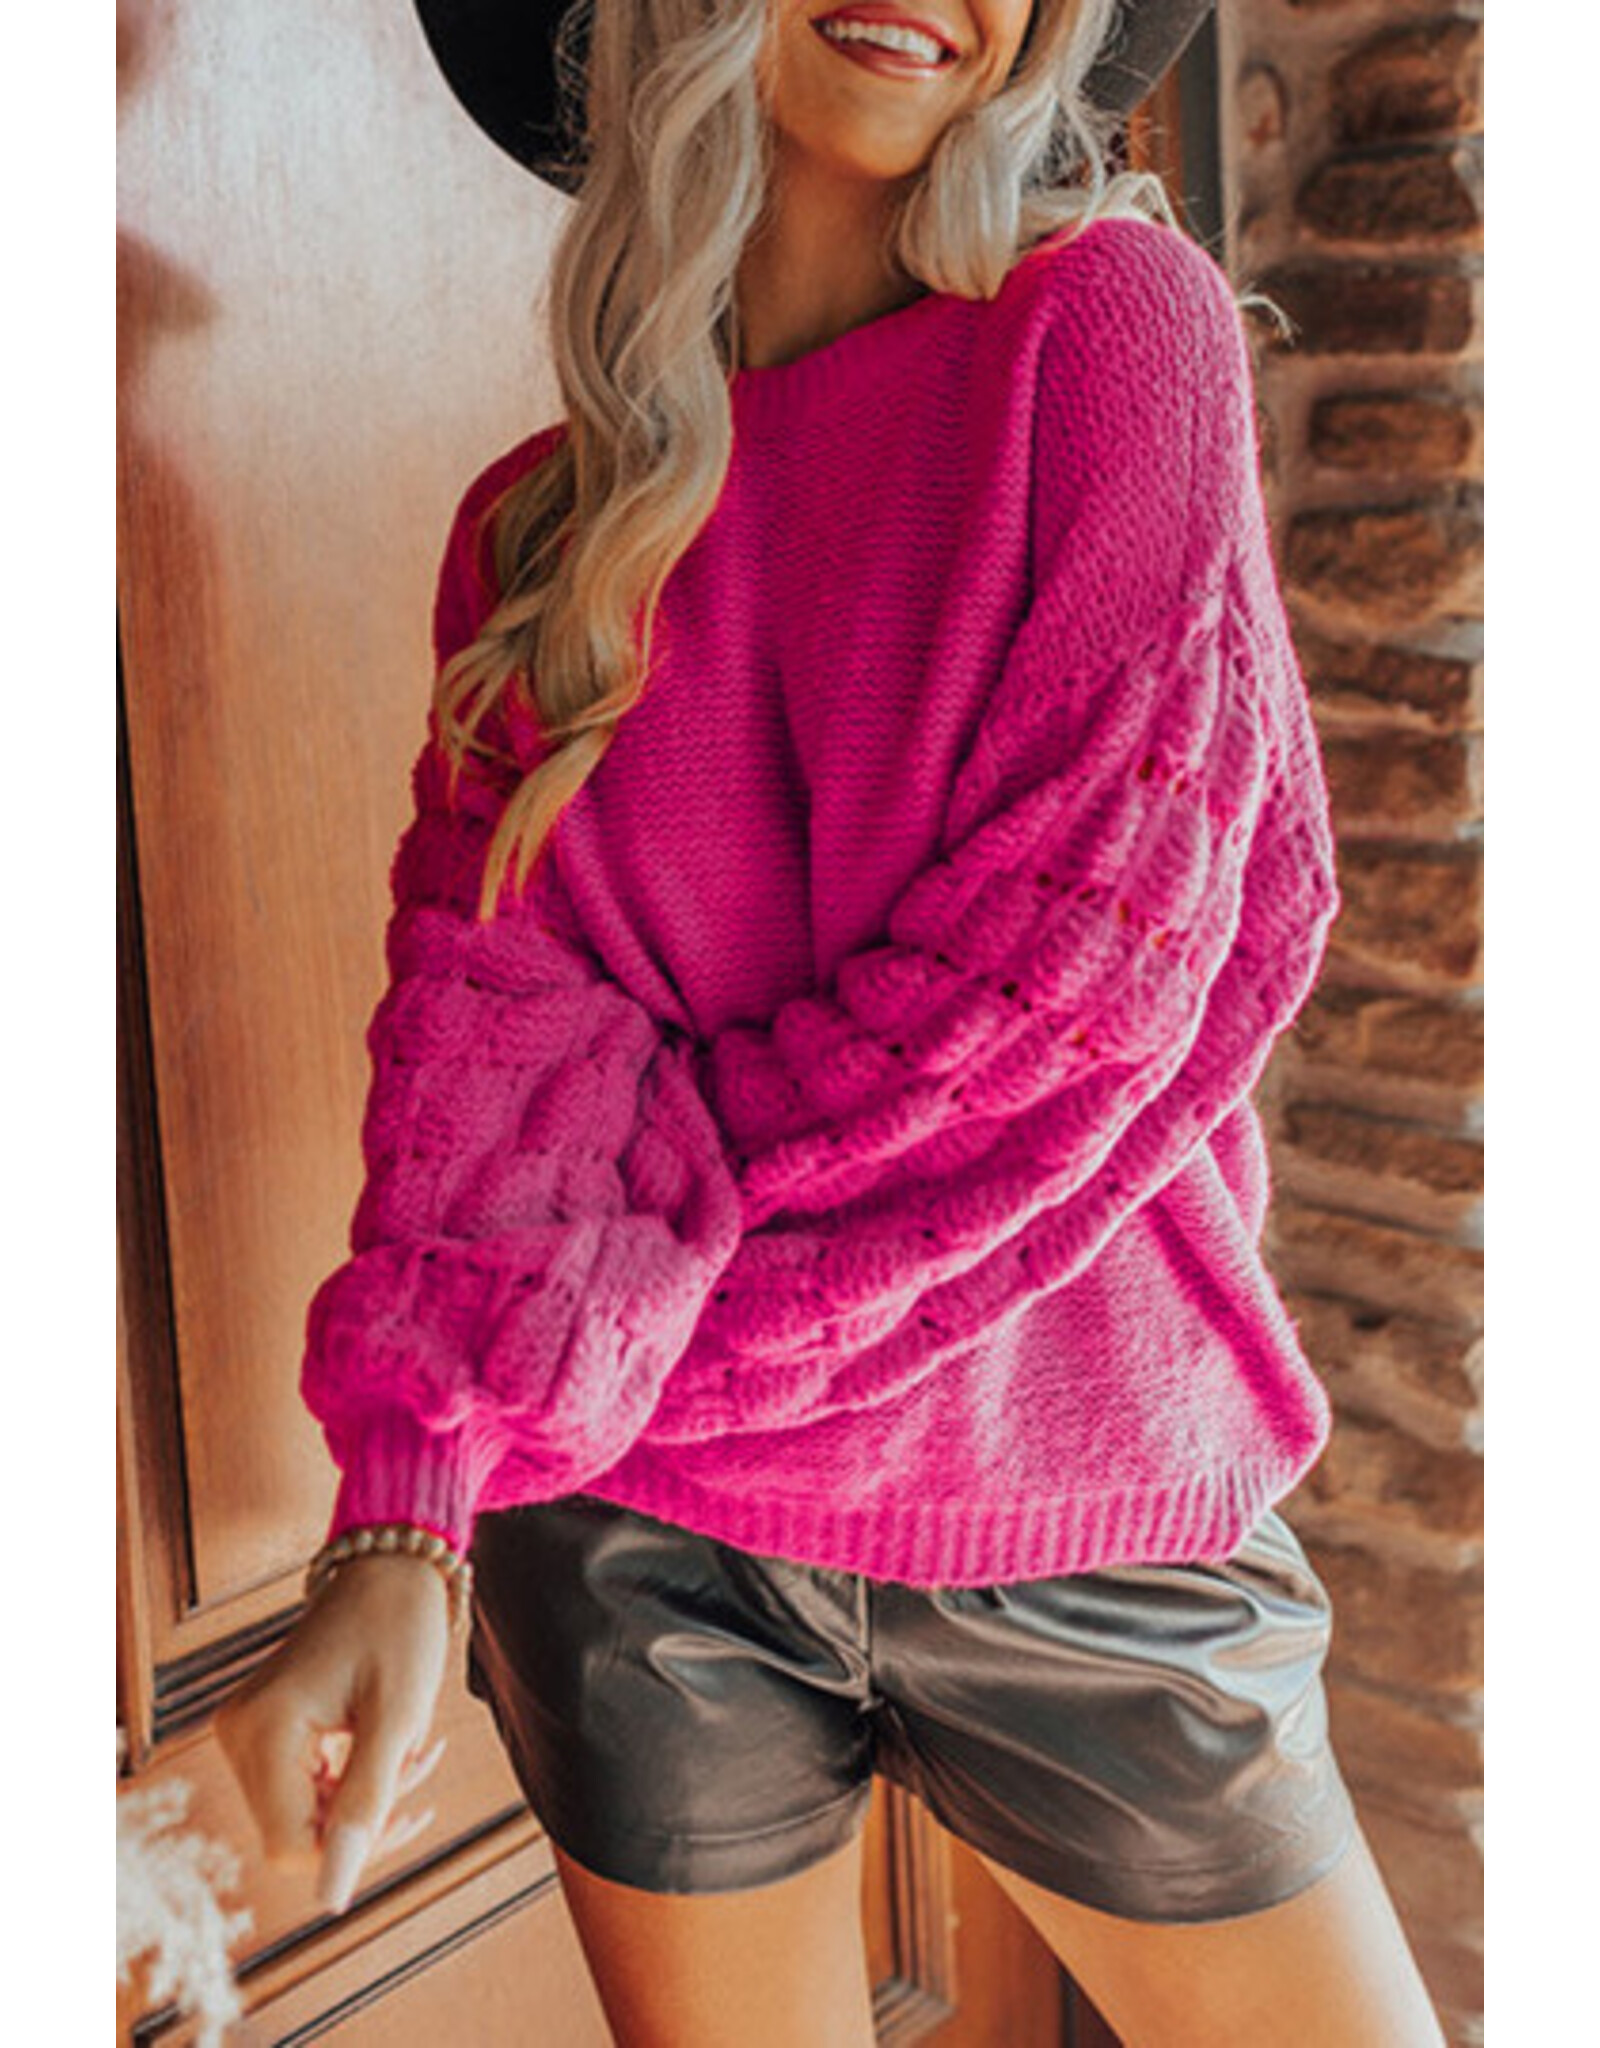 The Ritzy Gypsy Rosie Hollow Knit Sweater